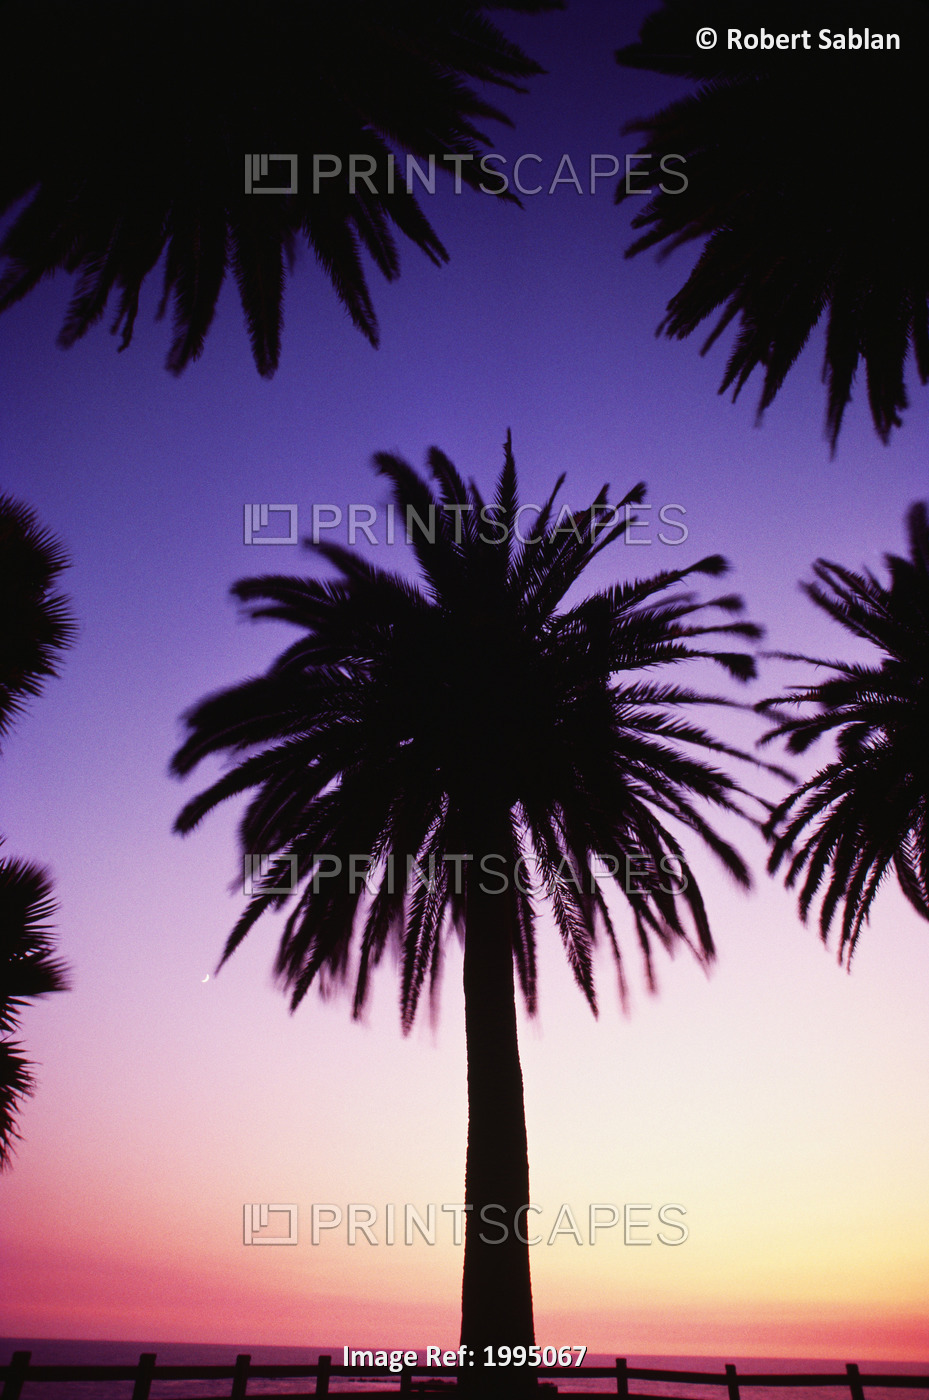 View Of Single Palm Tree, Surrounded By Other Palm Tree Tops, Background Is ...